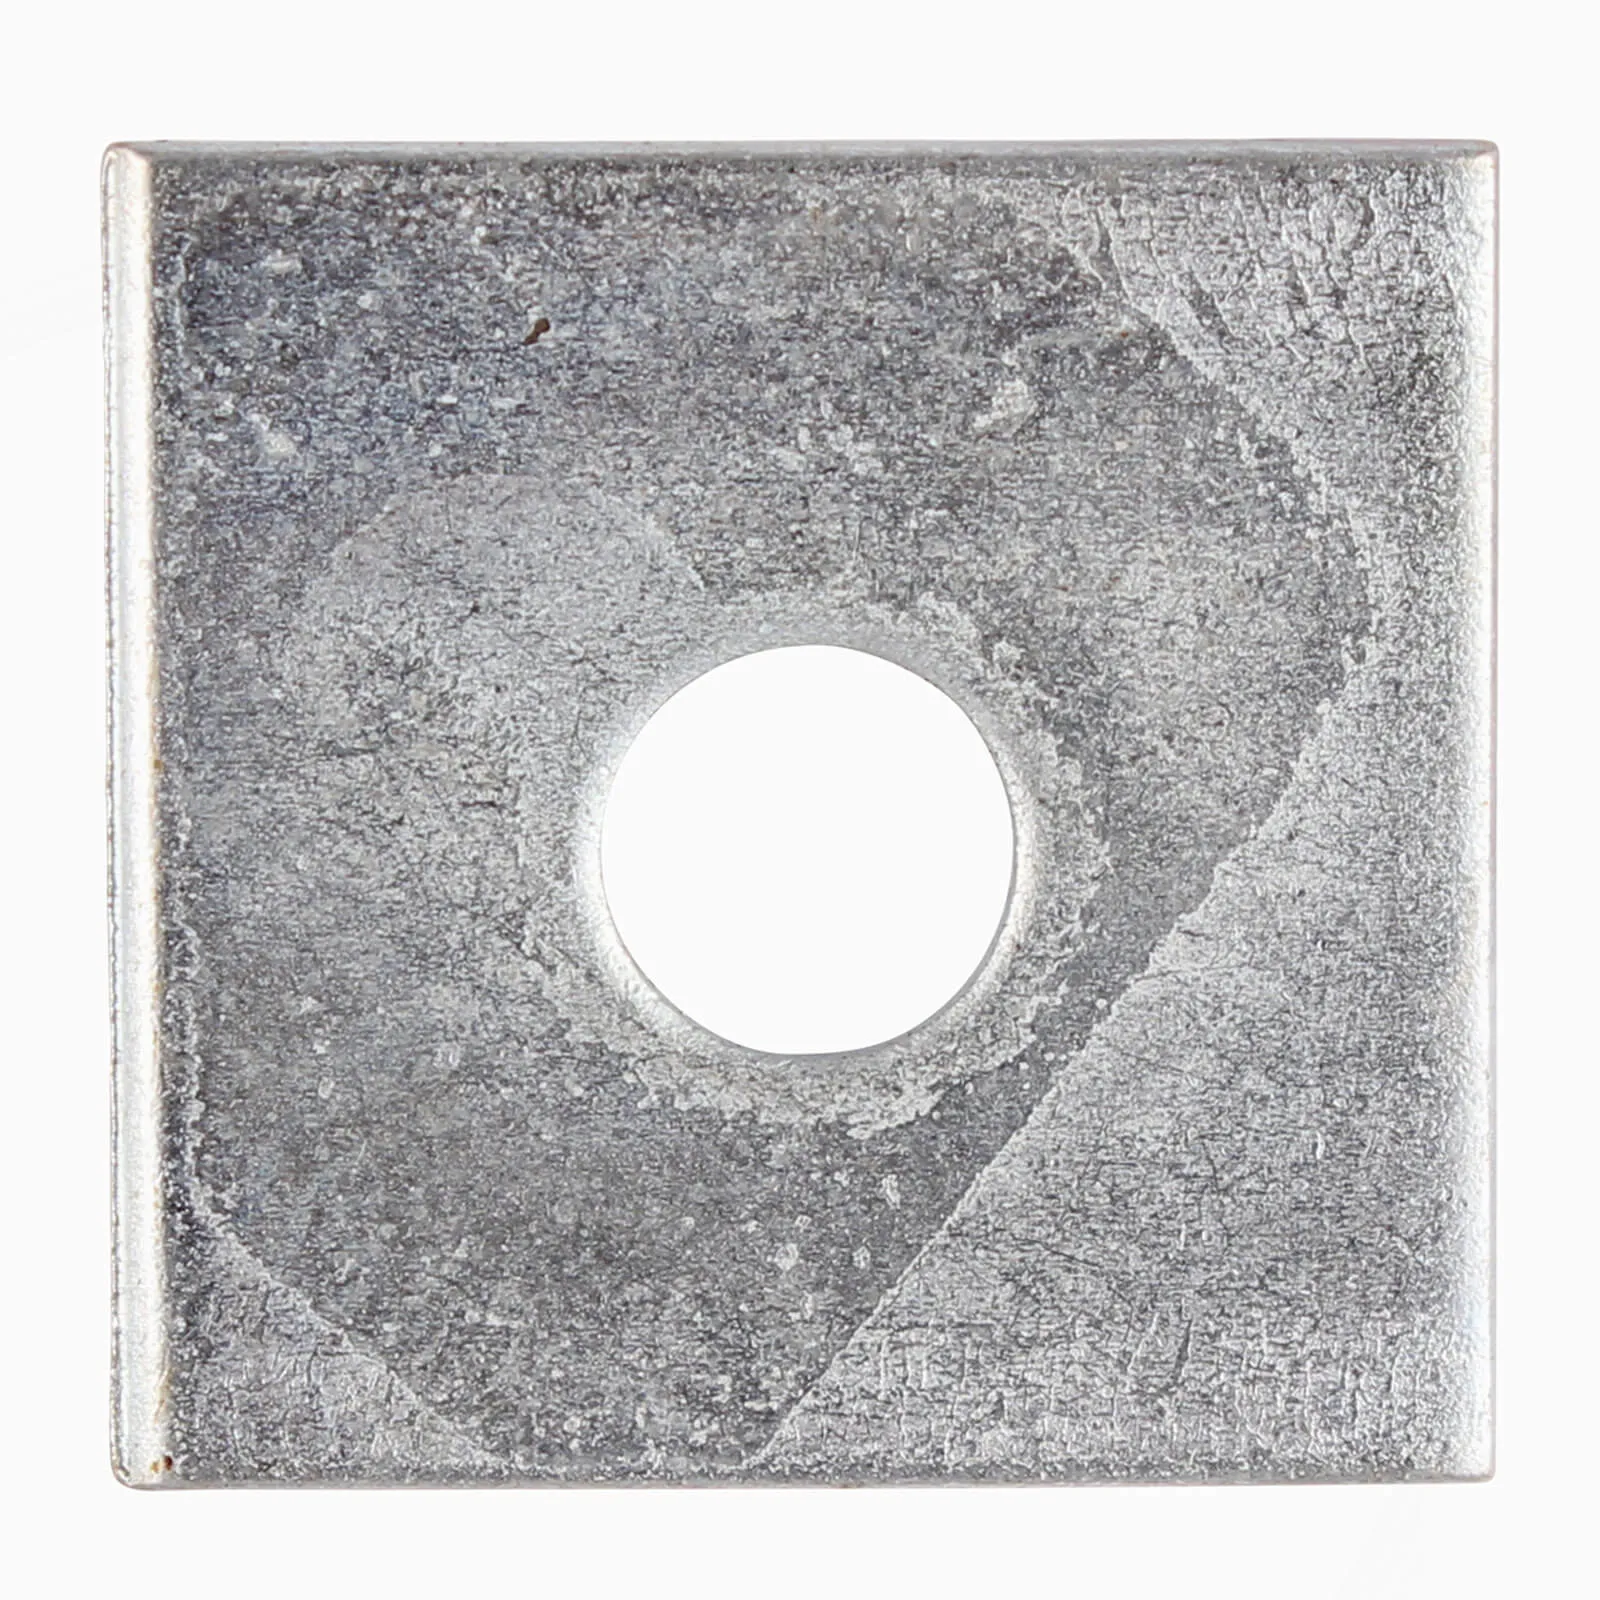 Square Plate Washer Zinc Plated - 10mm, 50mm, Pack of 2